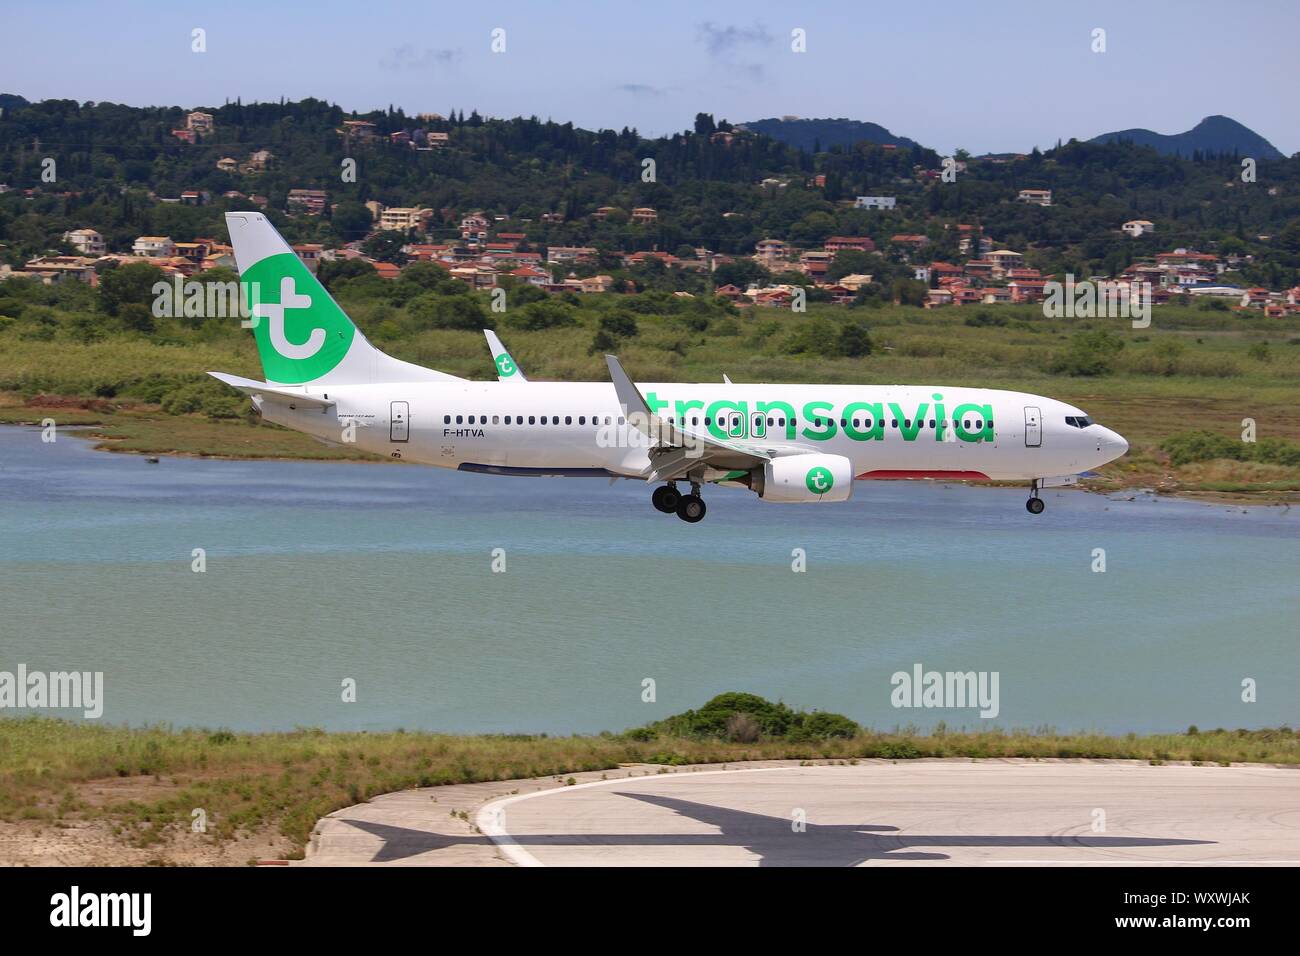 CORFU, GREECE - JUNE 5, 2016: Transavia Boeing 737-800 arrives at Corfu International Airport, Greece. Transavia is a Dutch low-cost airline owned by Stock Photo